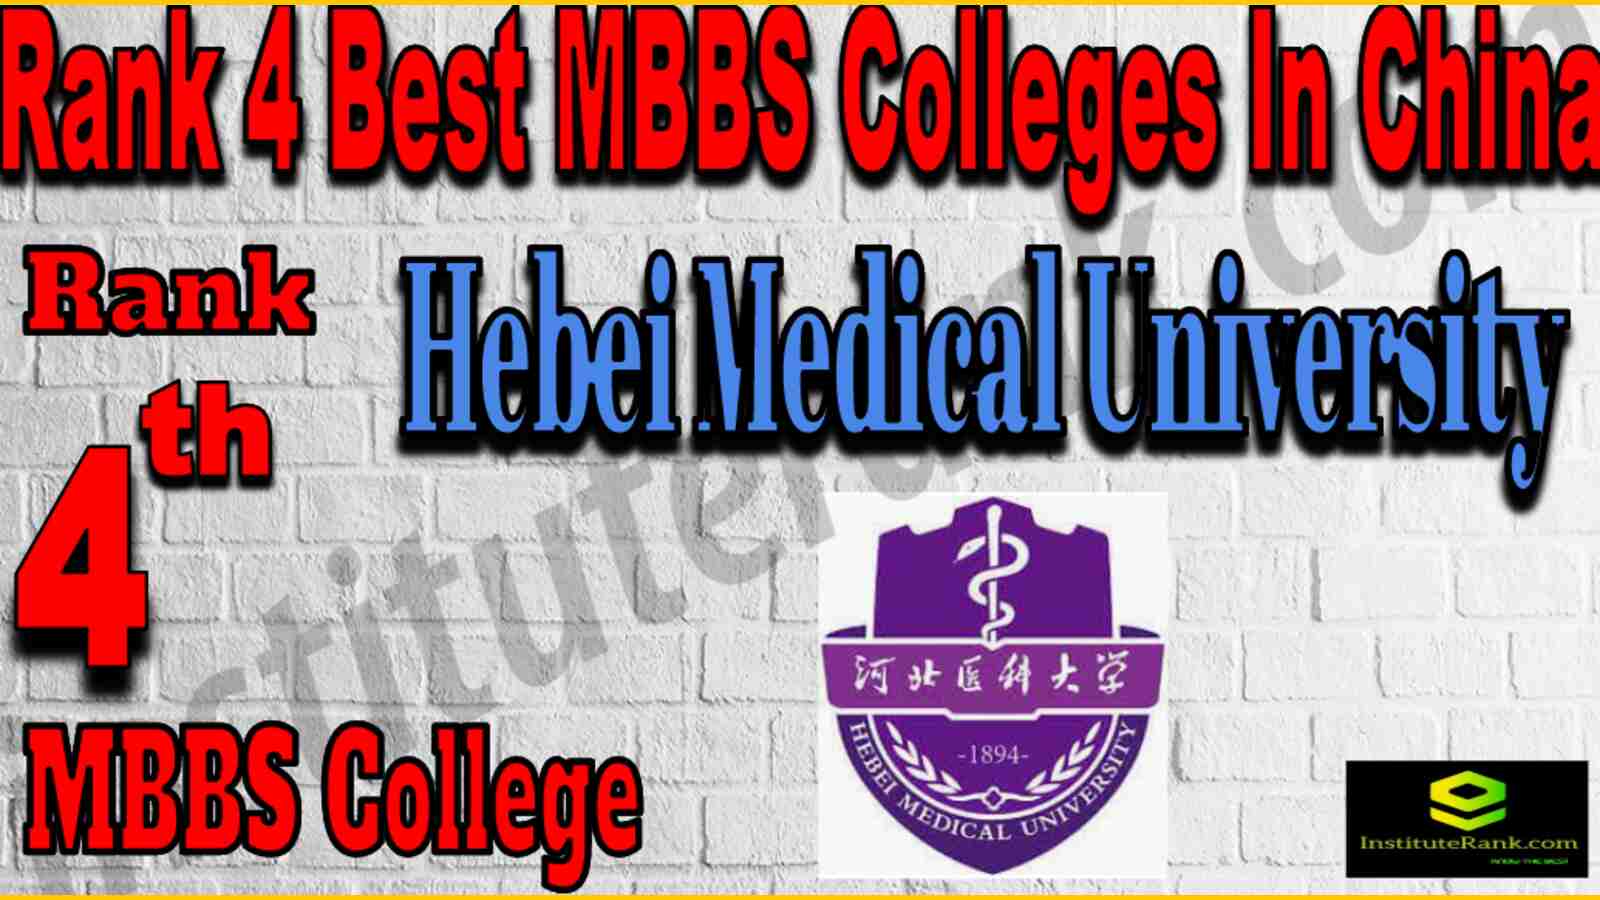 Rank 4 Best MBBS Colleges In China